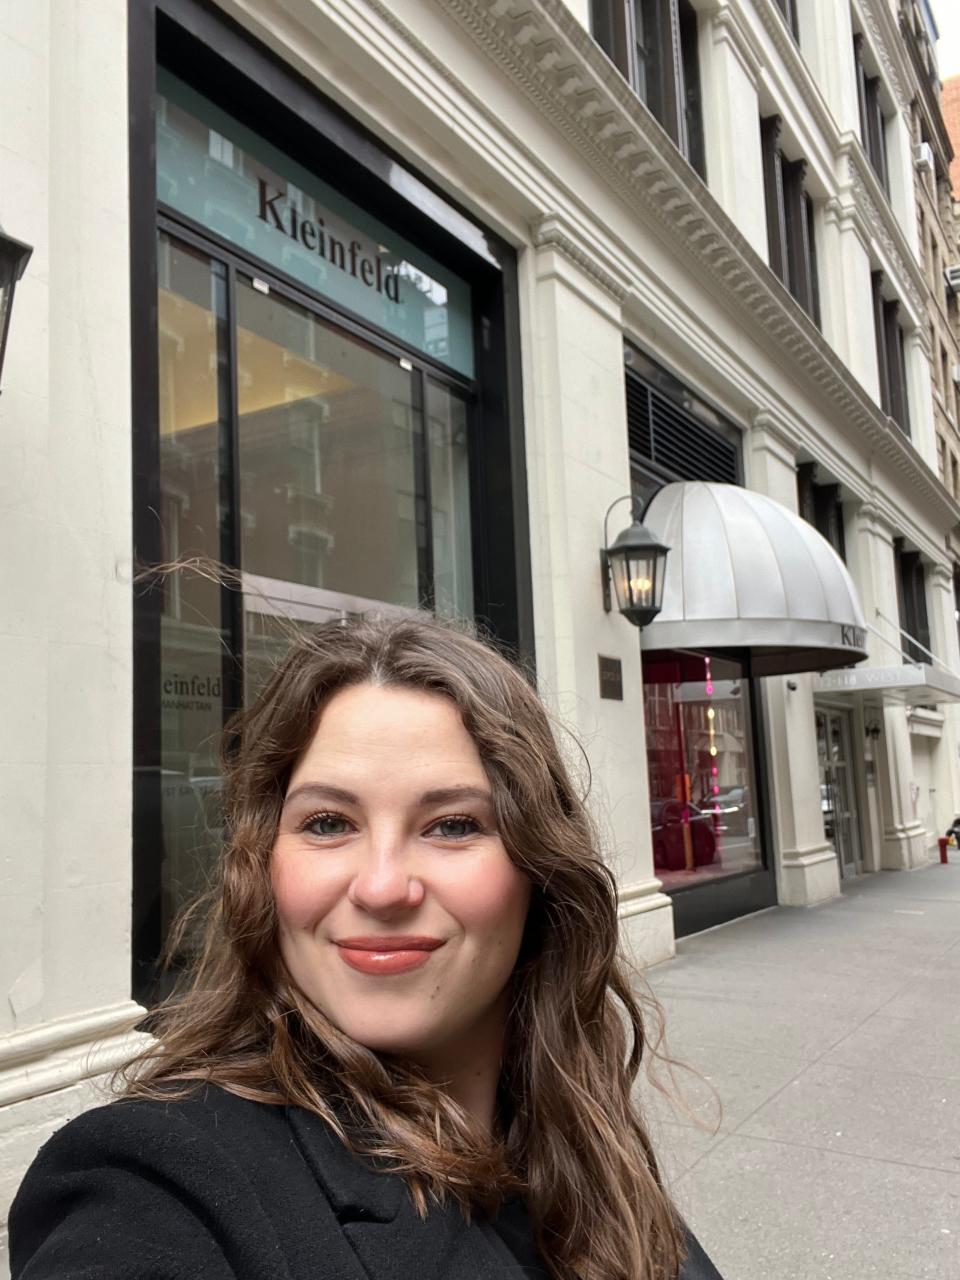 A woman with brown hair poses for a selfie outside of Kleinfeld Bridal.